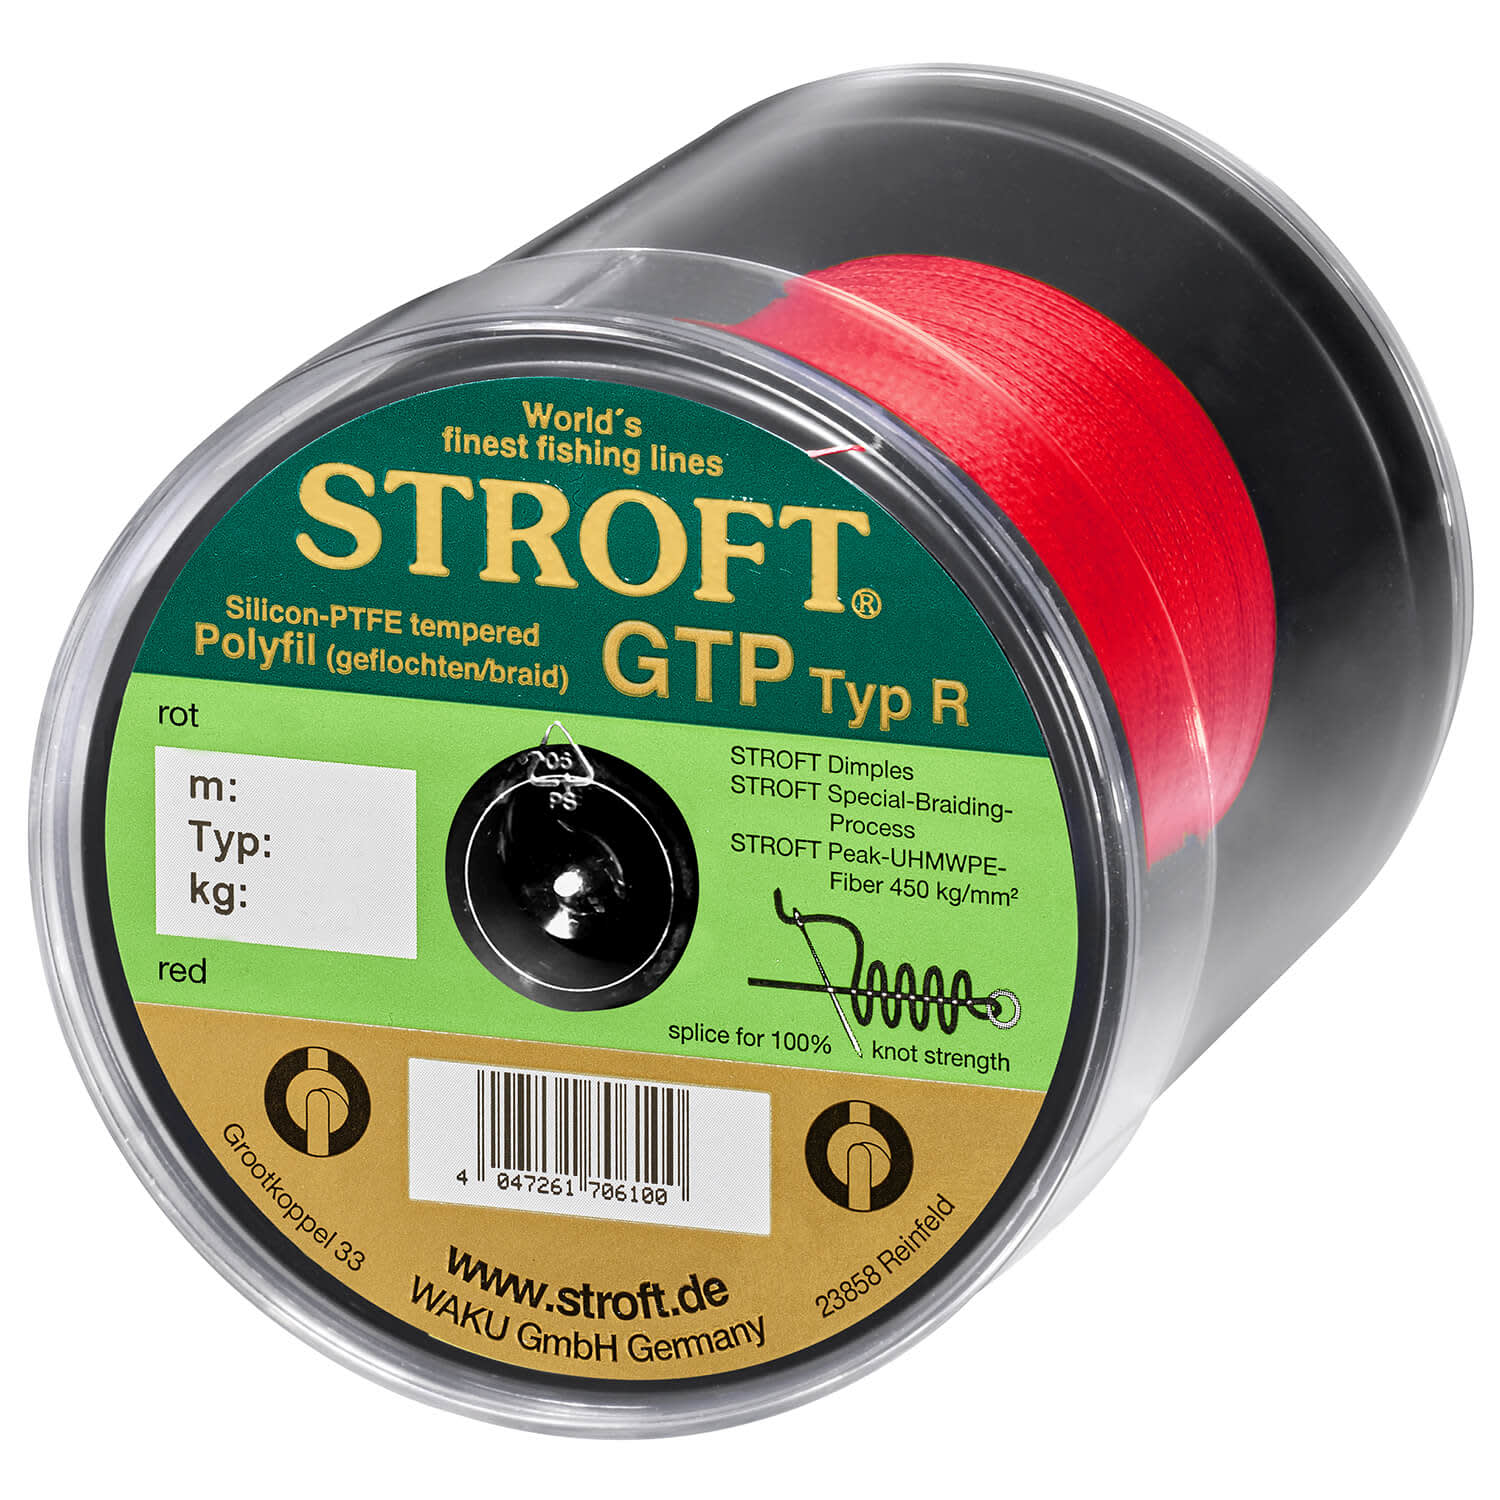 STROFT GTP Type R Braided Fishing Line 600m red buy by Koeder Laden